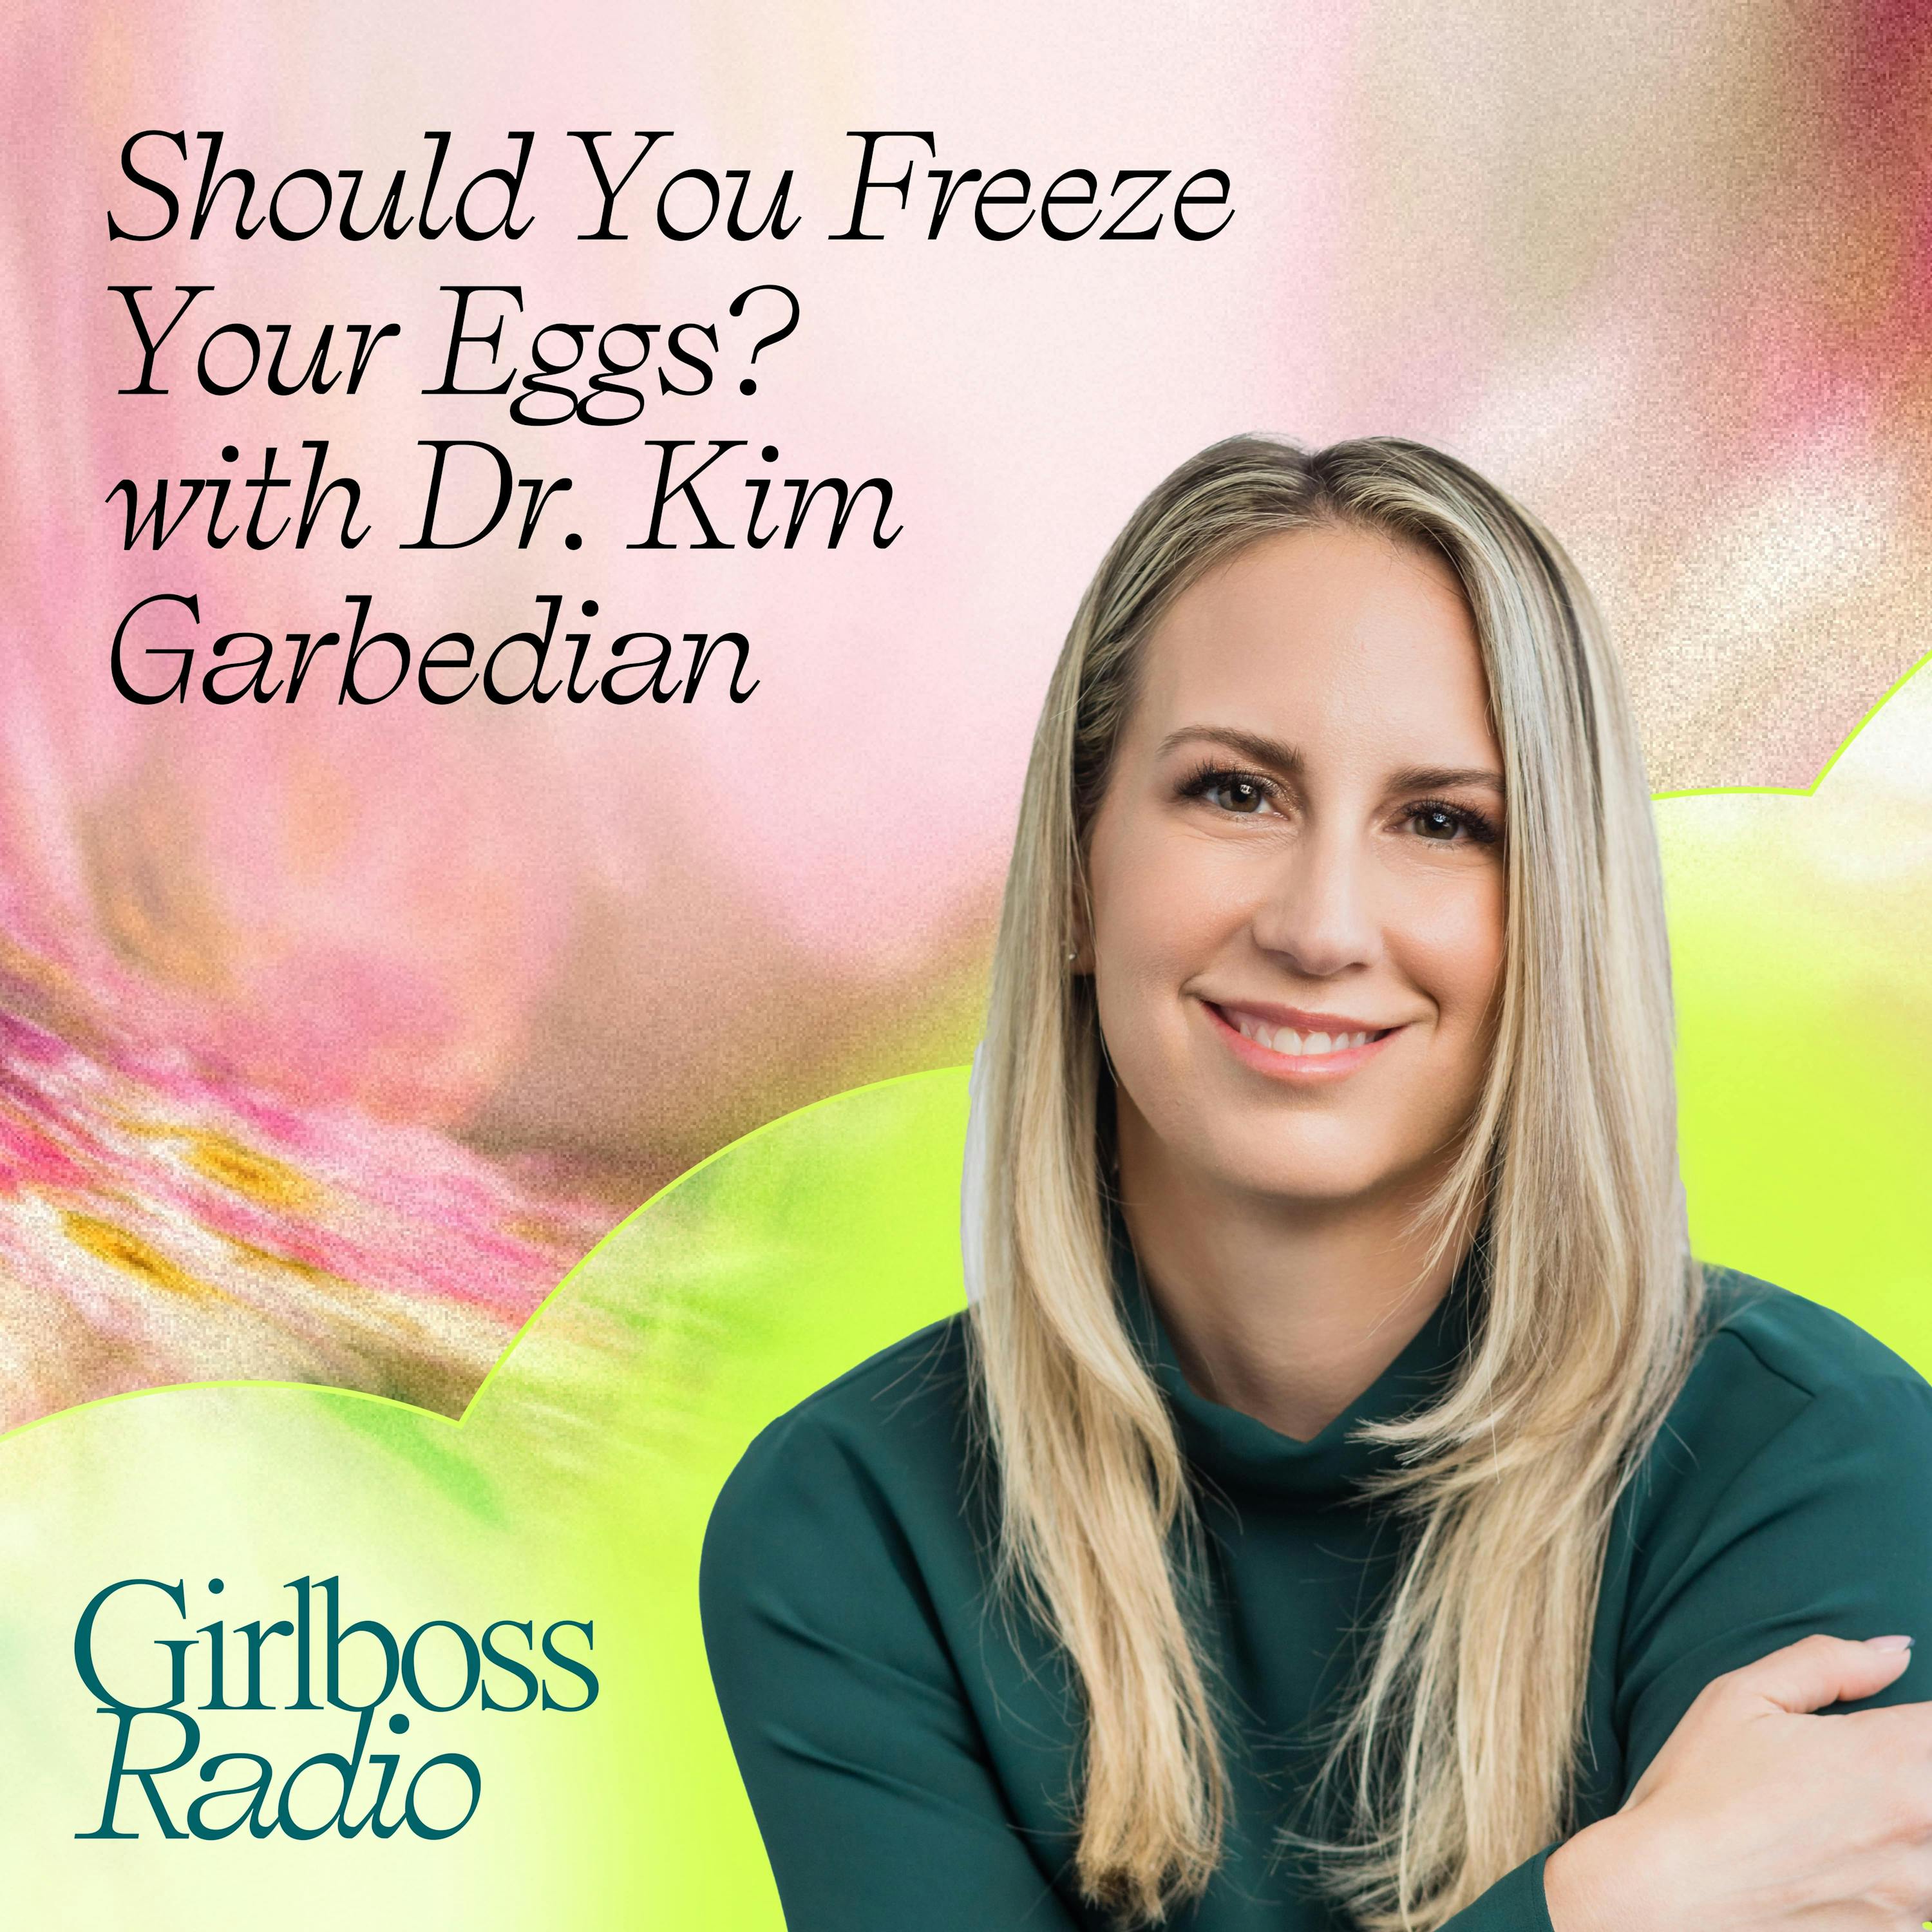 Should You Freeze Your Eggs? with Dr. Kim Garbedian